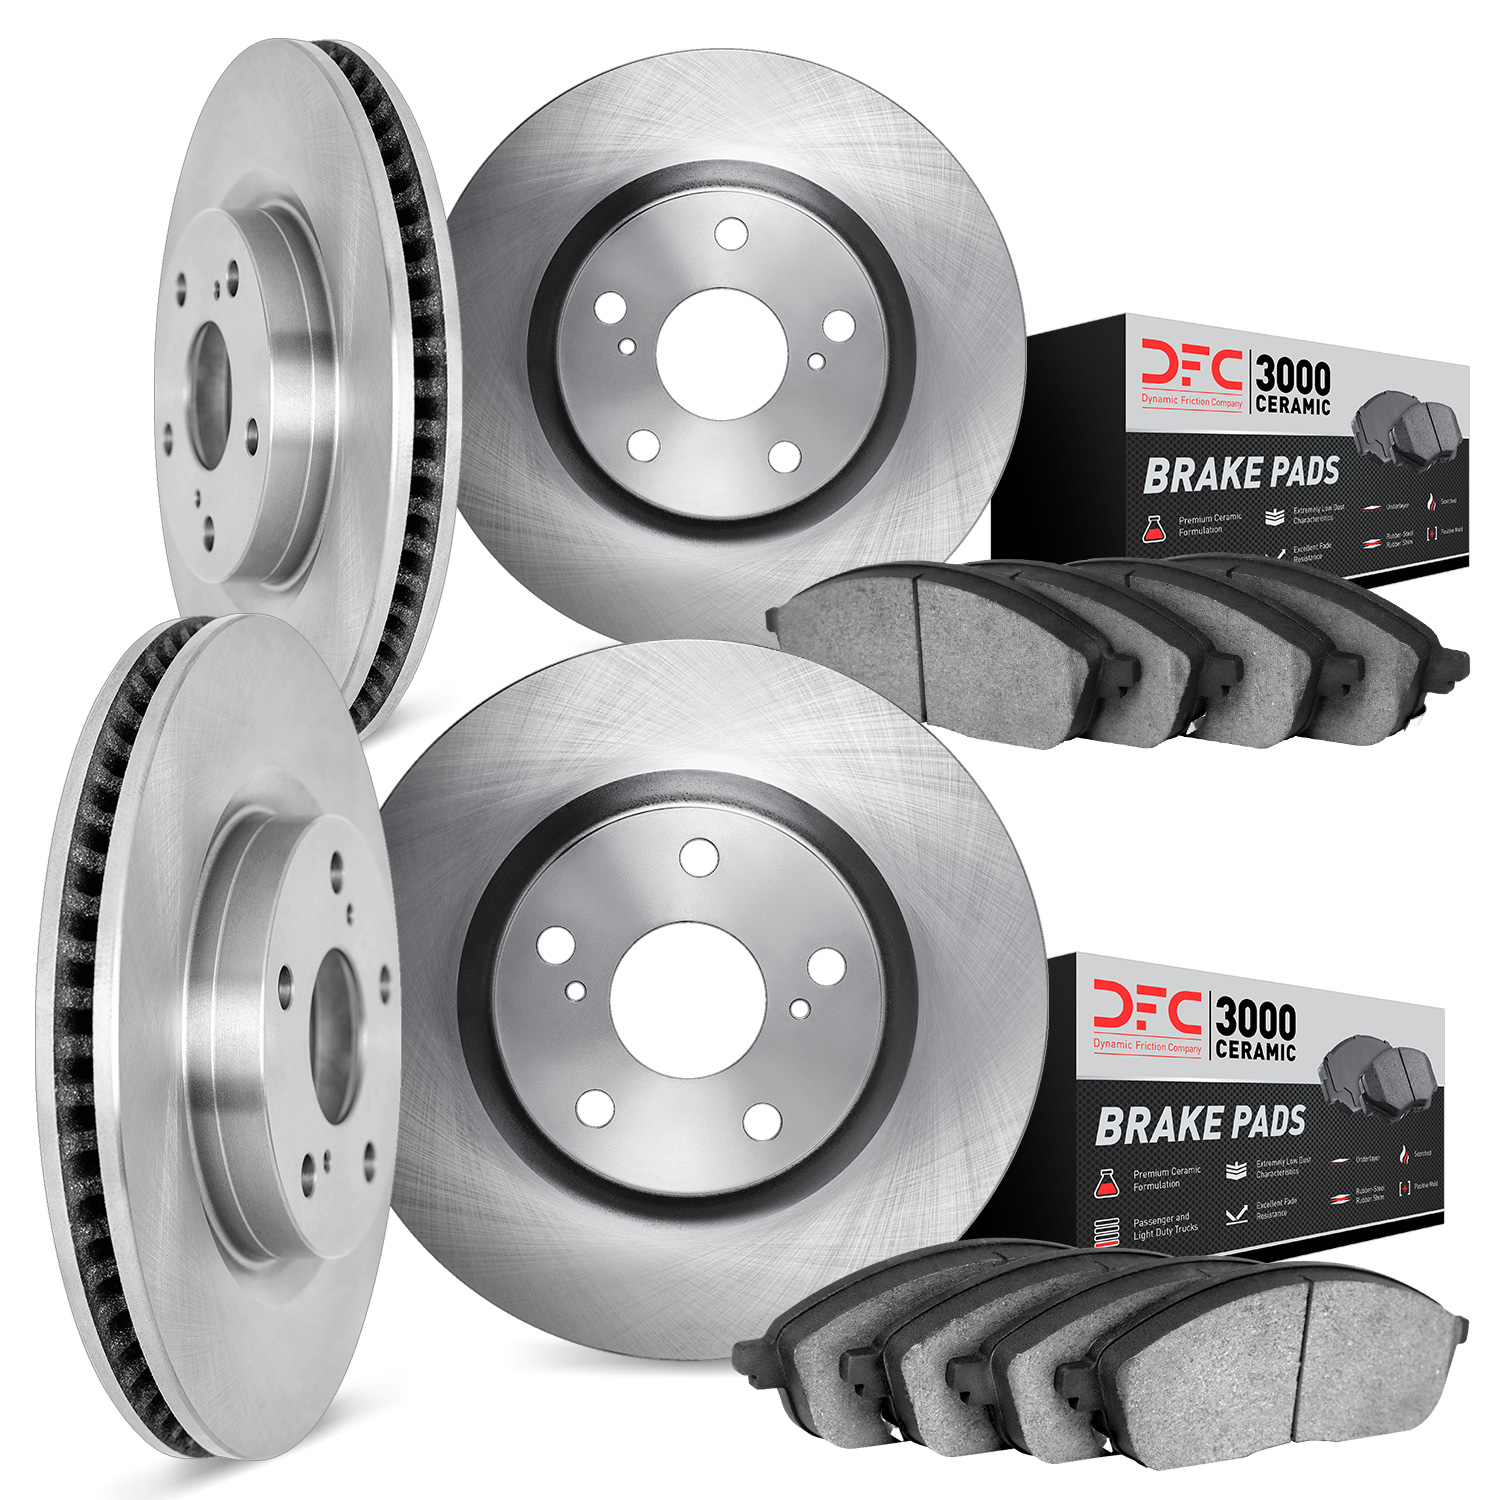 6304-67078 Brake Rotors with 3000-Series Ceramic Brake Pads Kit, Fits Select Infiniti/Nissan, Position: Front and Rear